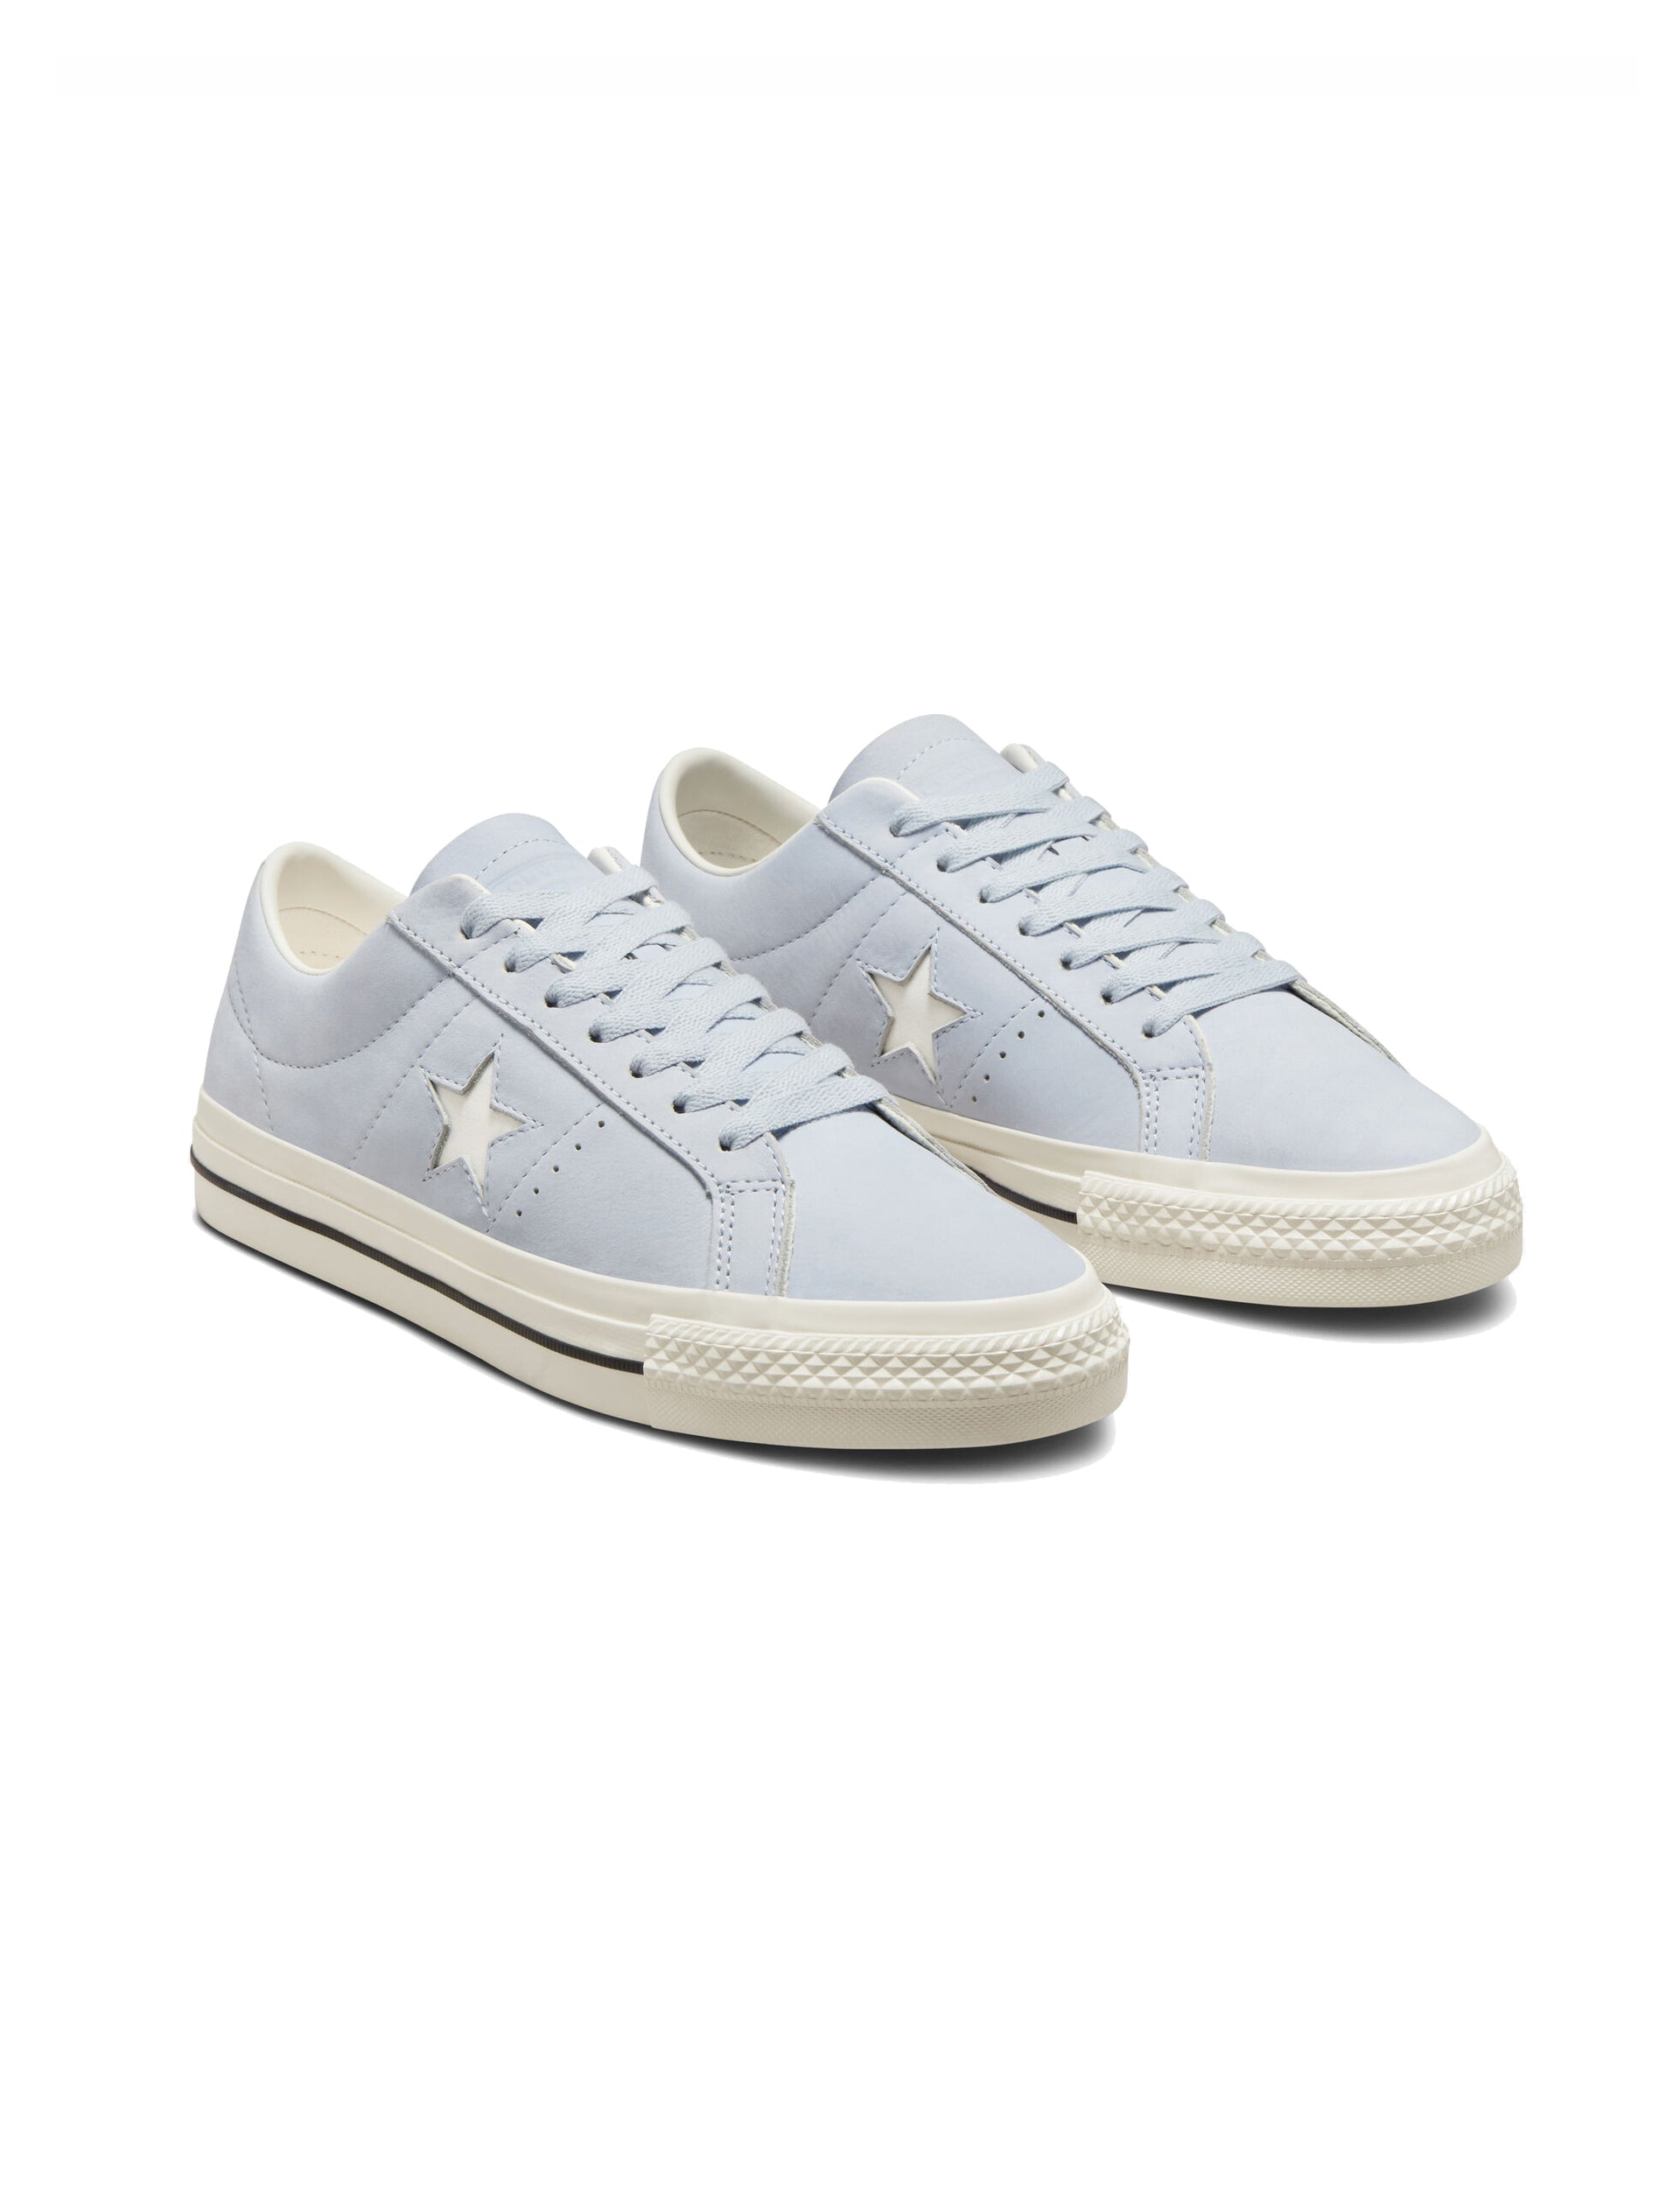 CONVERSE One Star Pro Nubuck Leather Ghosted/Egret/Black